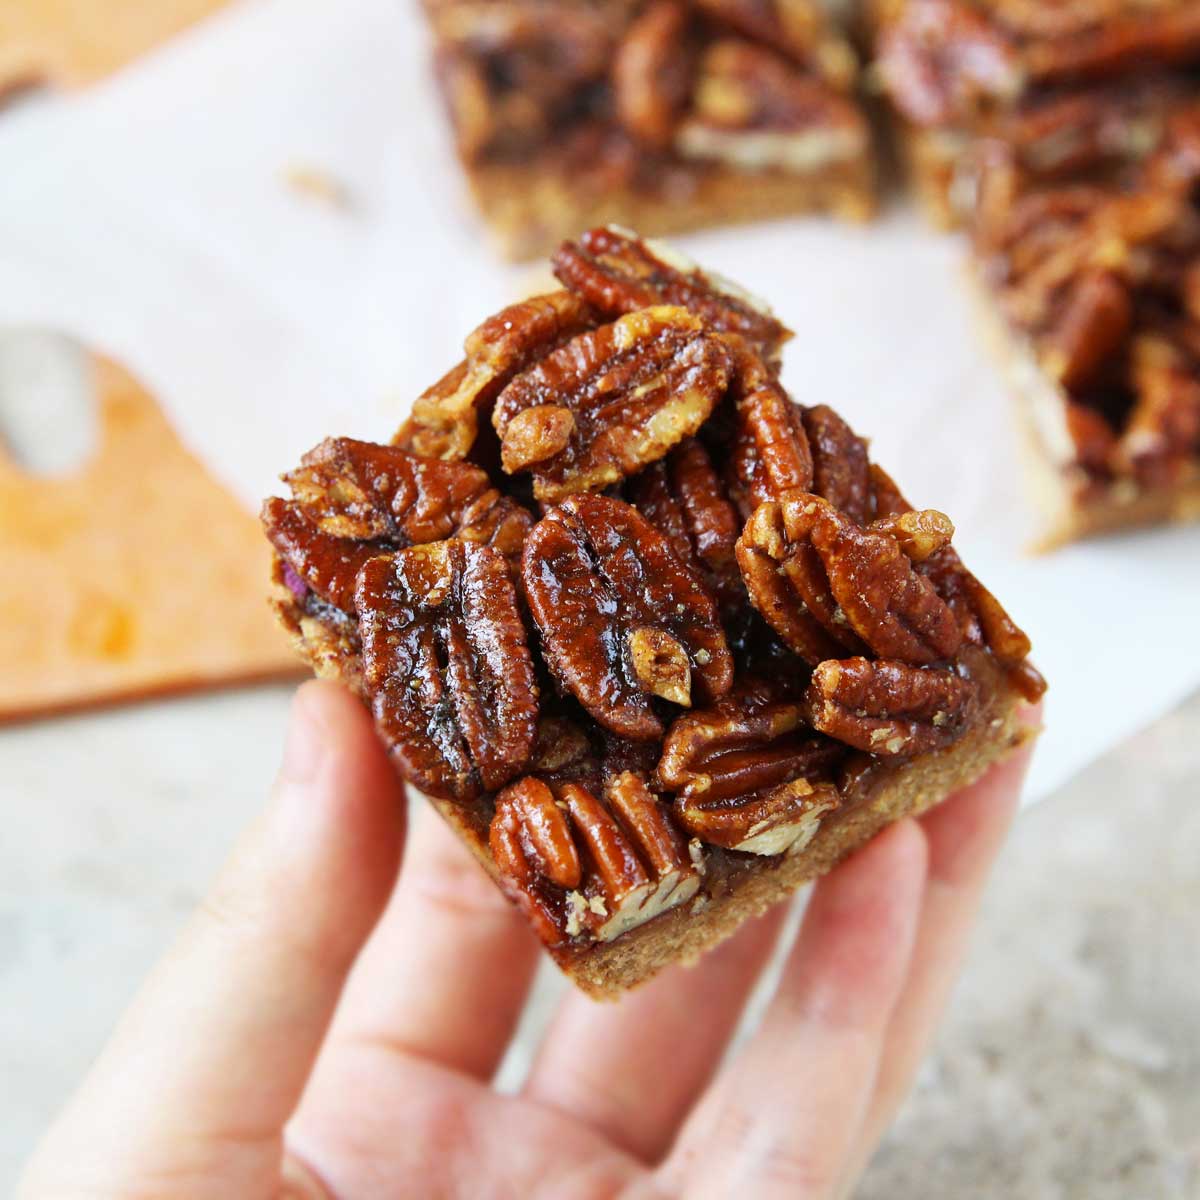 How to Make Vegan Pecan Pie Bars Using Canned Chickpeas - Roasted Corn Naan